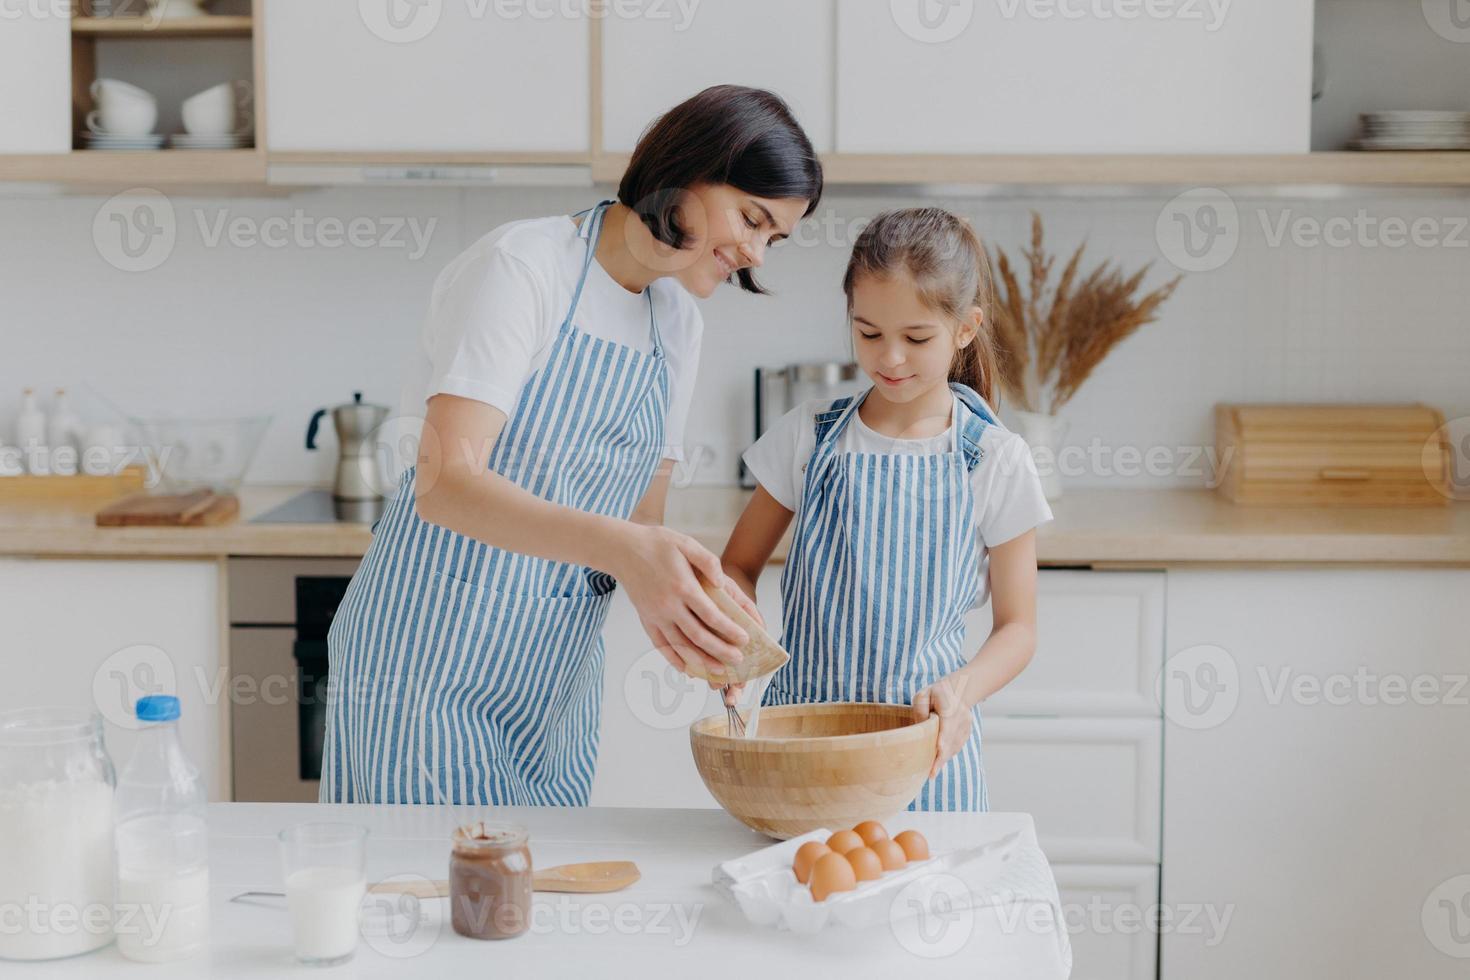 https://static.vecteezy.com/system/resources/previews/007/907/528/non_2x/daughter-and-mother-love-cooking-dressed-in-striped-aprons-prepare-delicious-dinner-use-different-ingredients-have-kitchen-routine-stand-at-home-children-motherhood-culinary-concept-photo.jpg